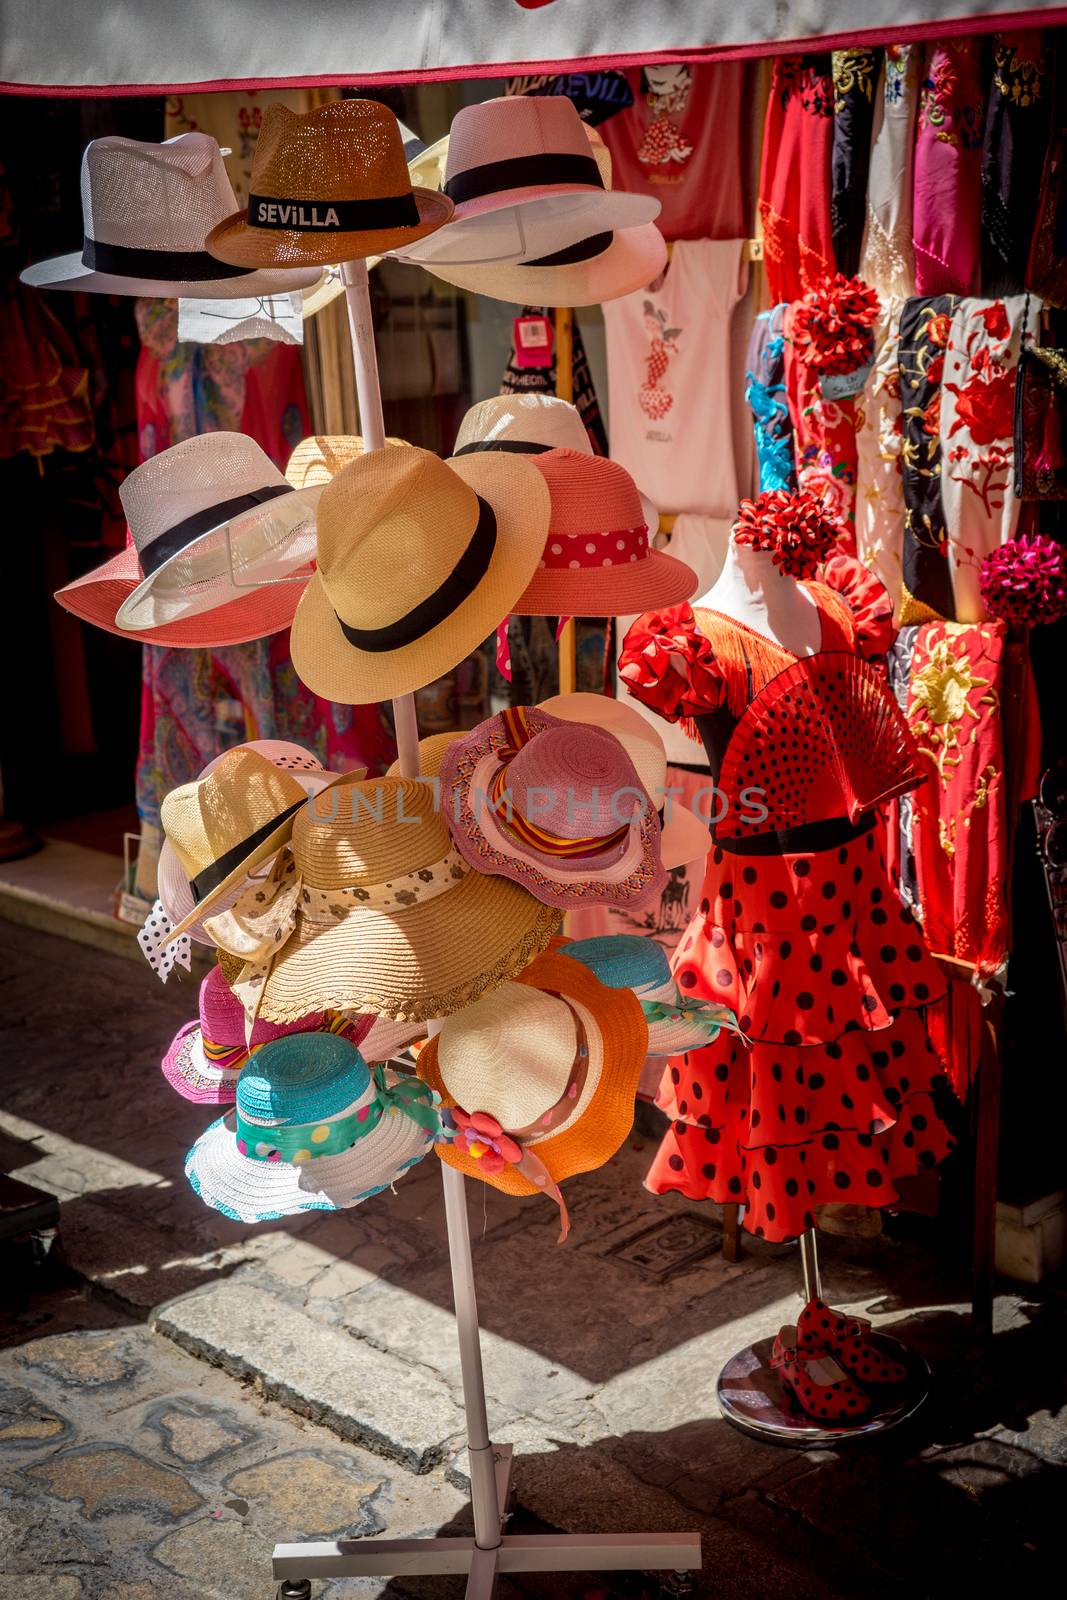 Caps and flamenco dress for sale in a shop in Seville, Spain, Eu by ramana16